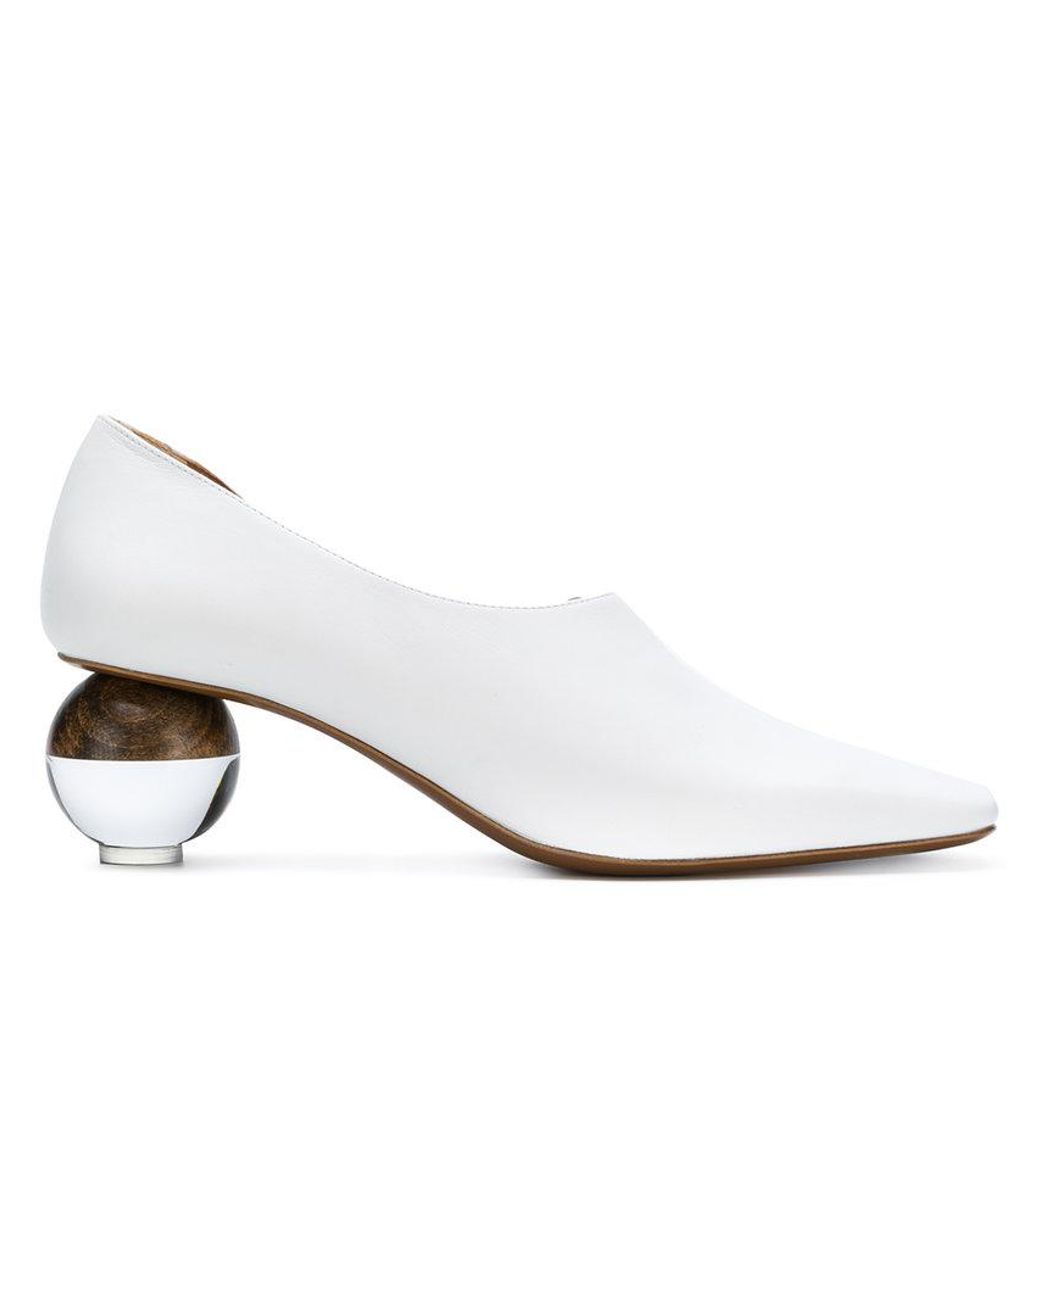 Neous Leather Ball Heel Pumps in White Lyst Australia